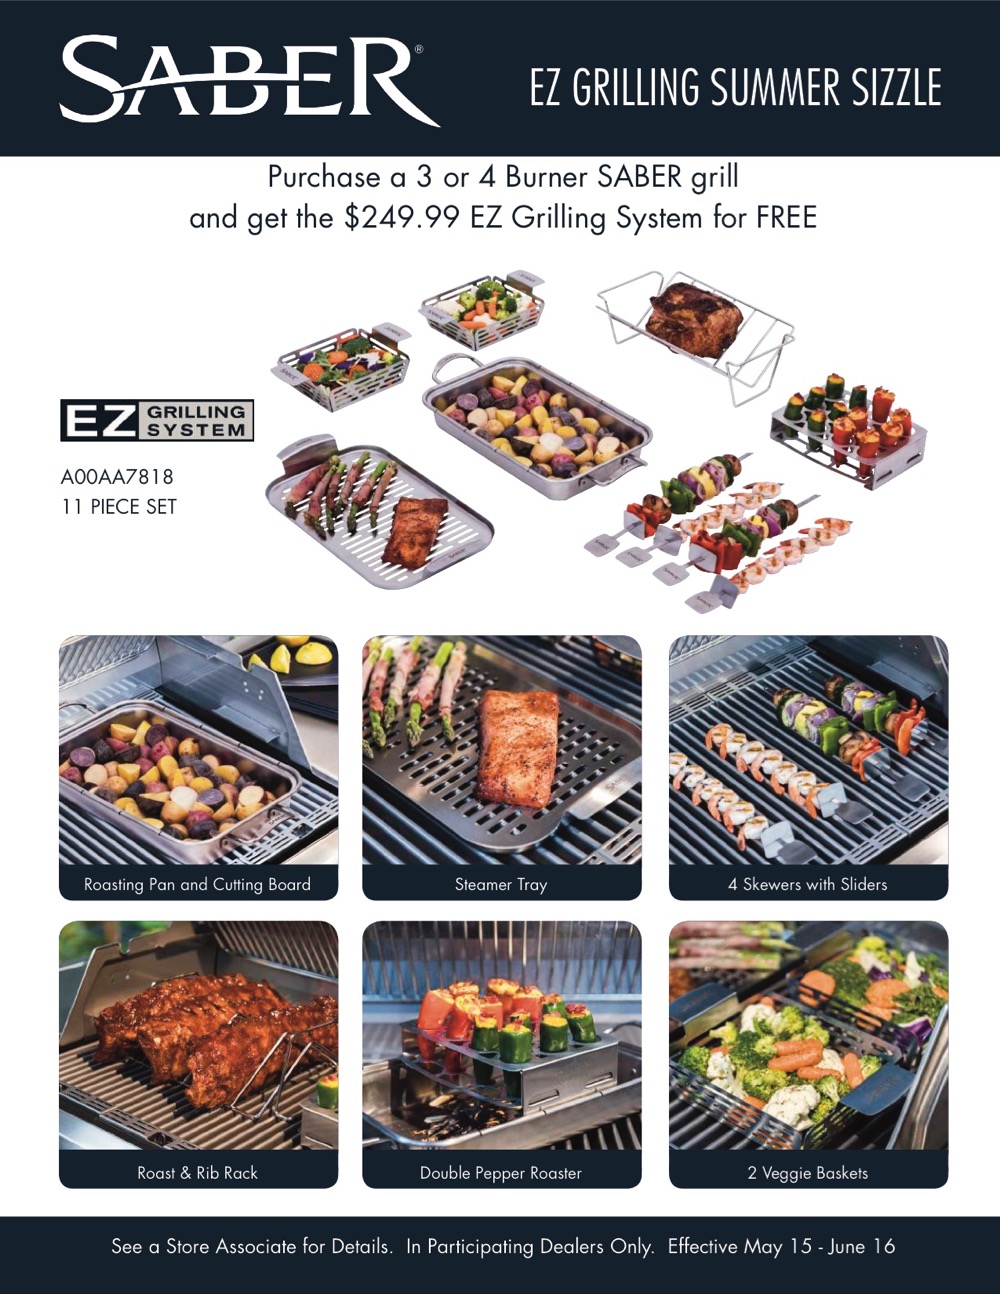 Woodstove Fireplace and Patio Shop - Saber Grill Promo